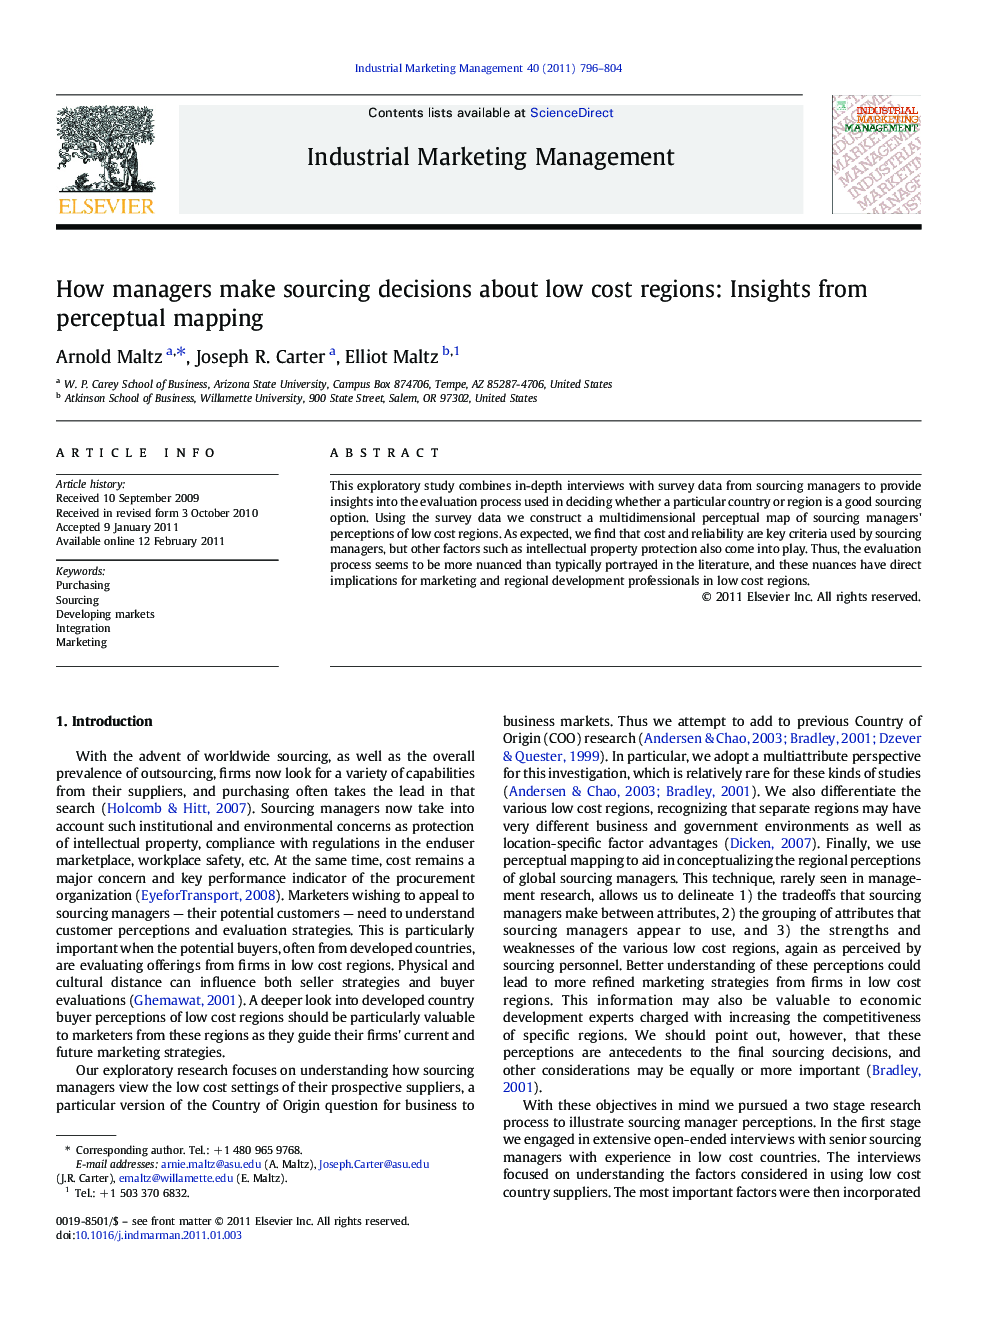 How managers make sourcing decisions about low cost regions: Insights from perceptual mapping